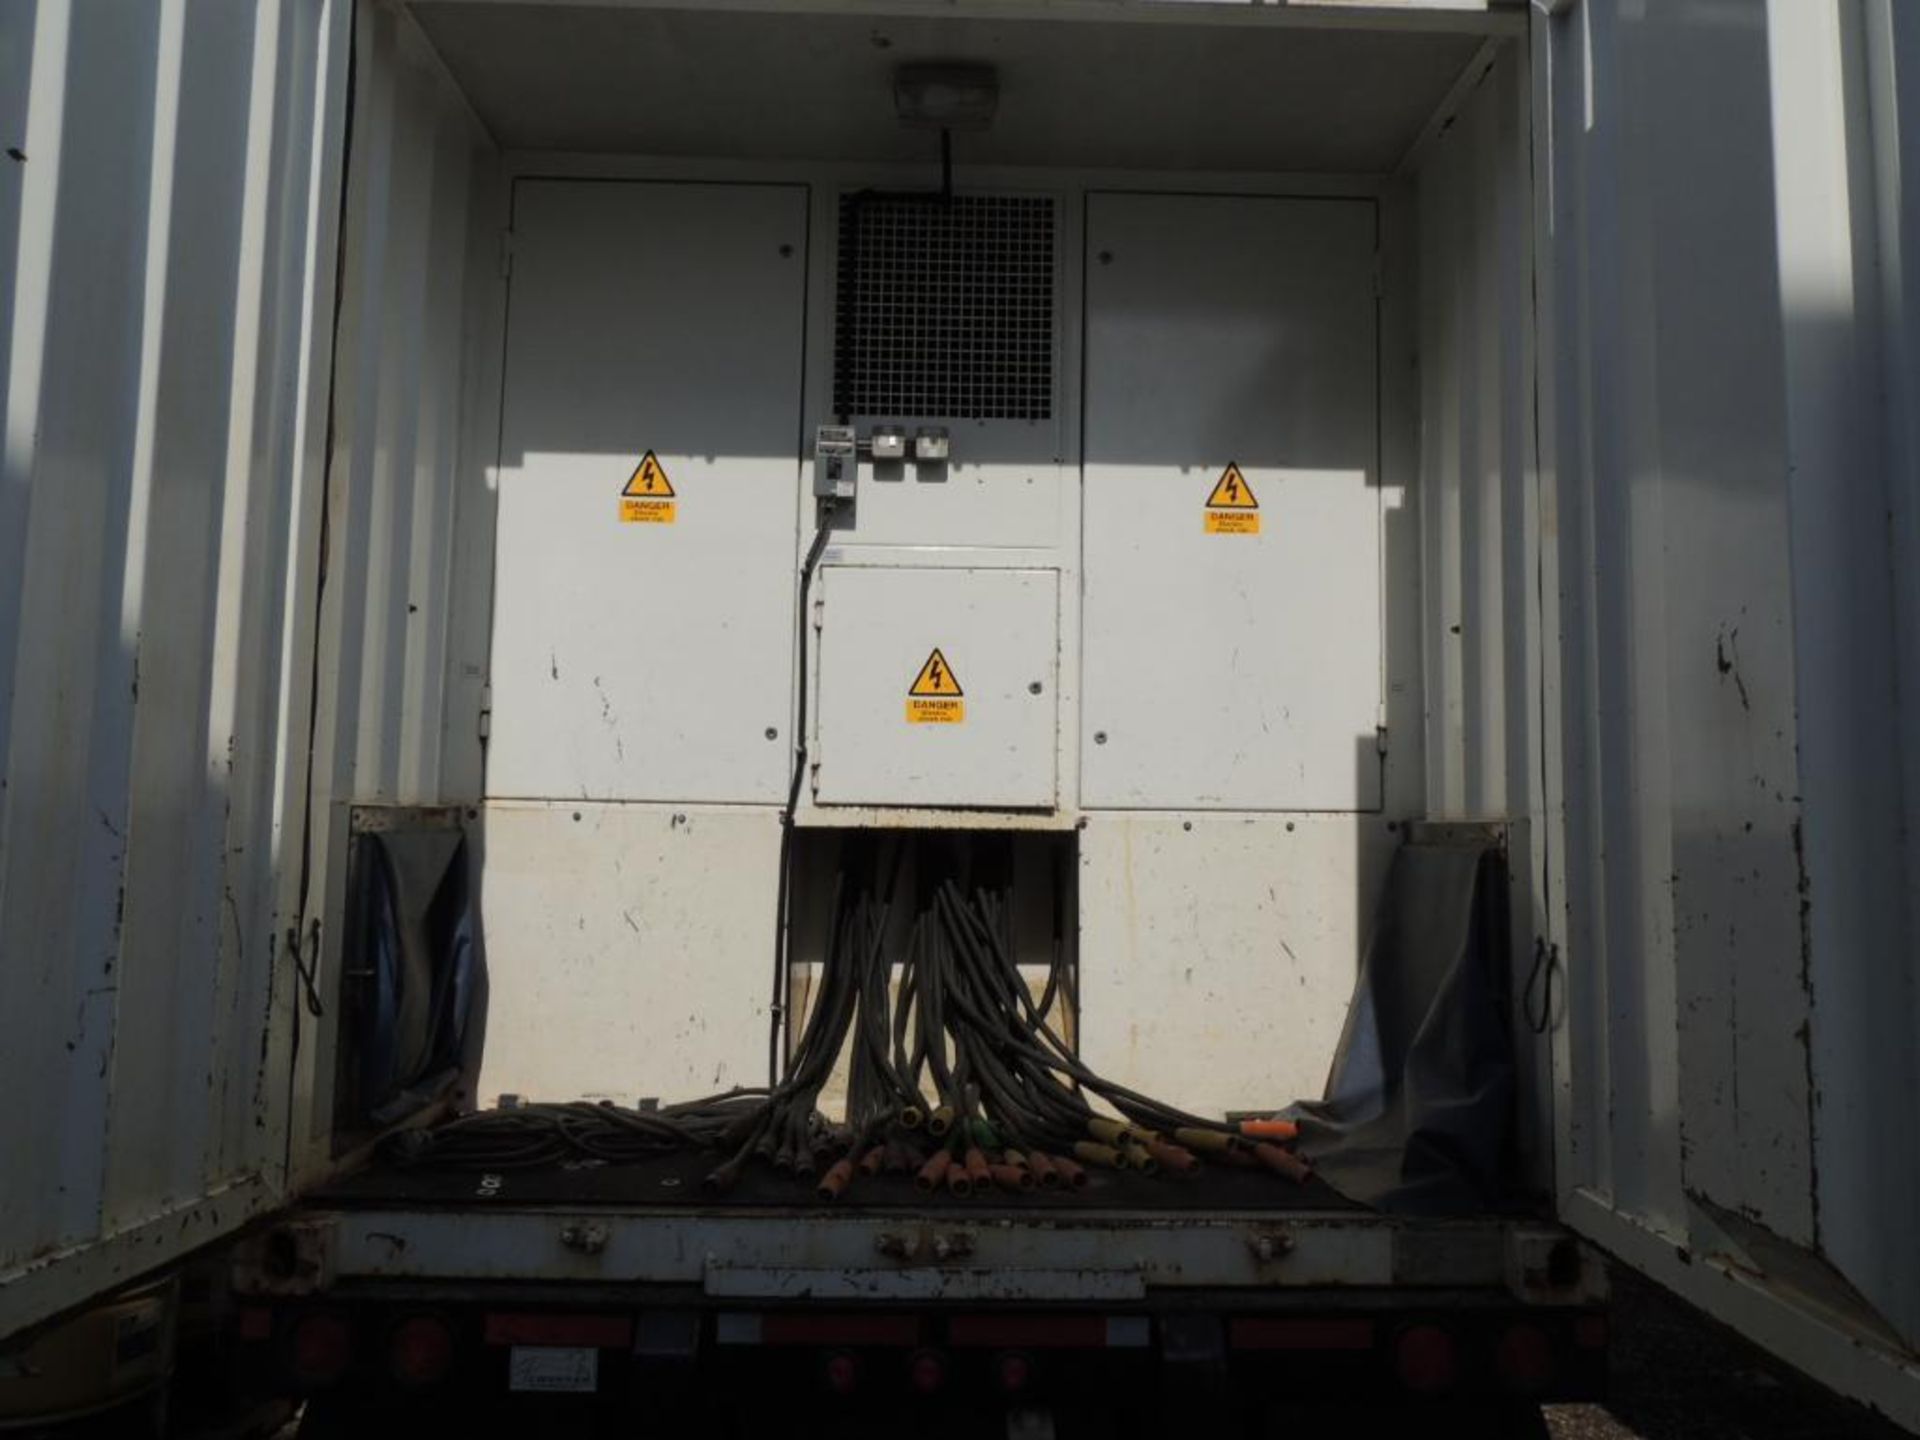 Caterpillar 3400kw Load Bank Resistive Reactive Portable Test Module, Mounted on Tandem-Axle Trailer - Image 4 of 13